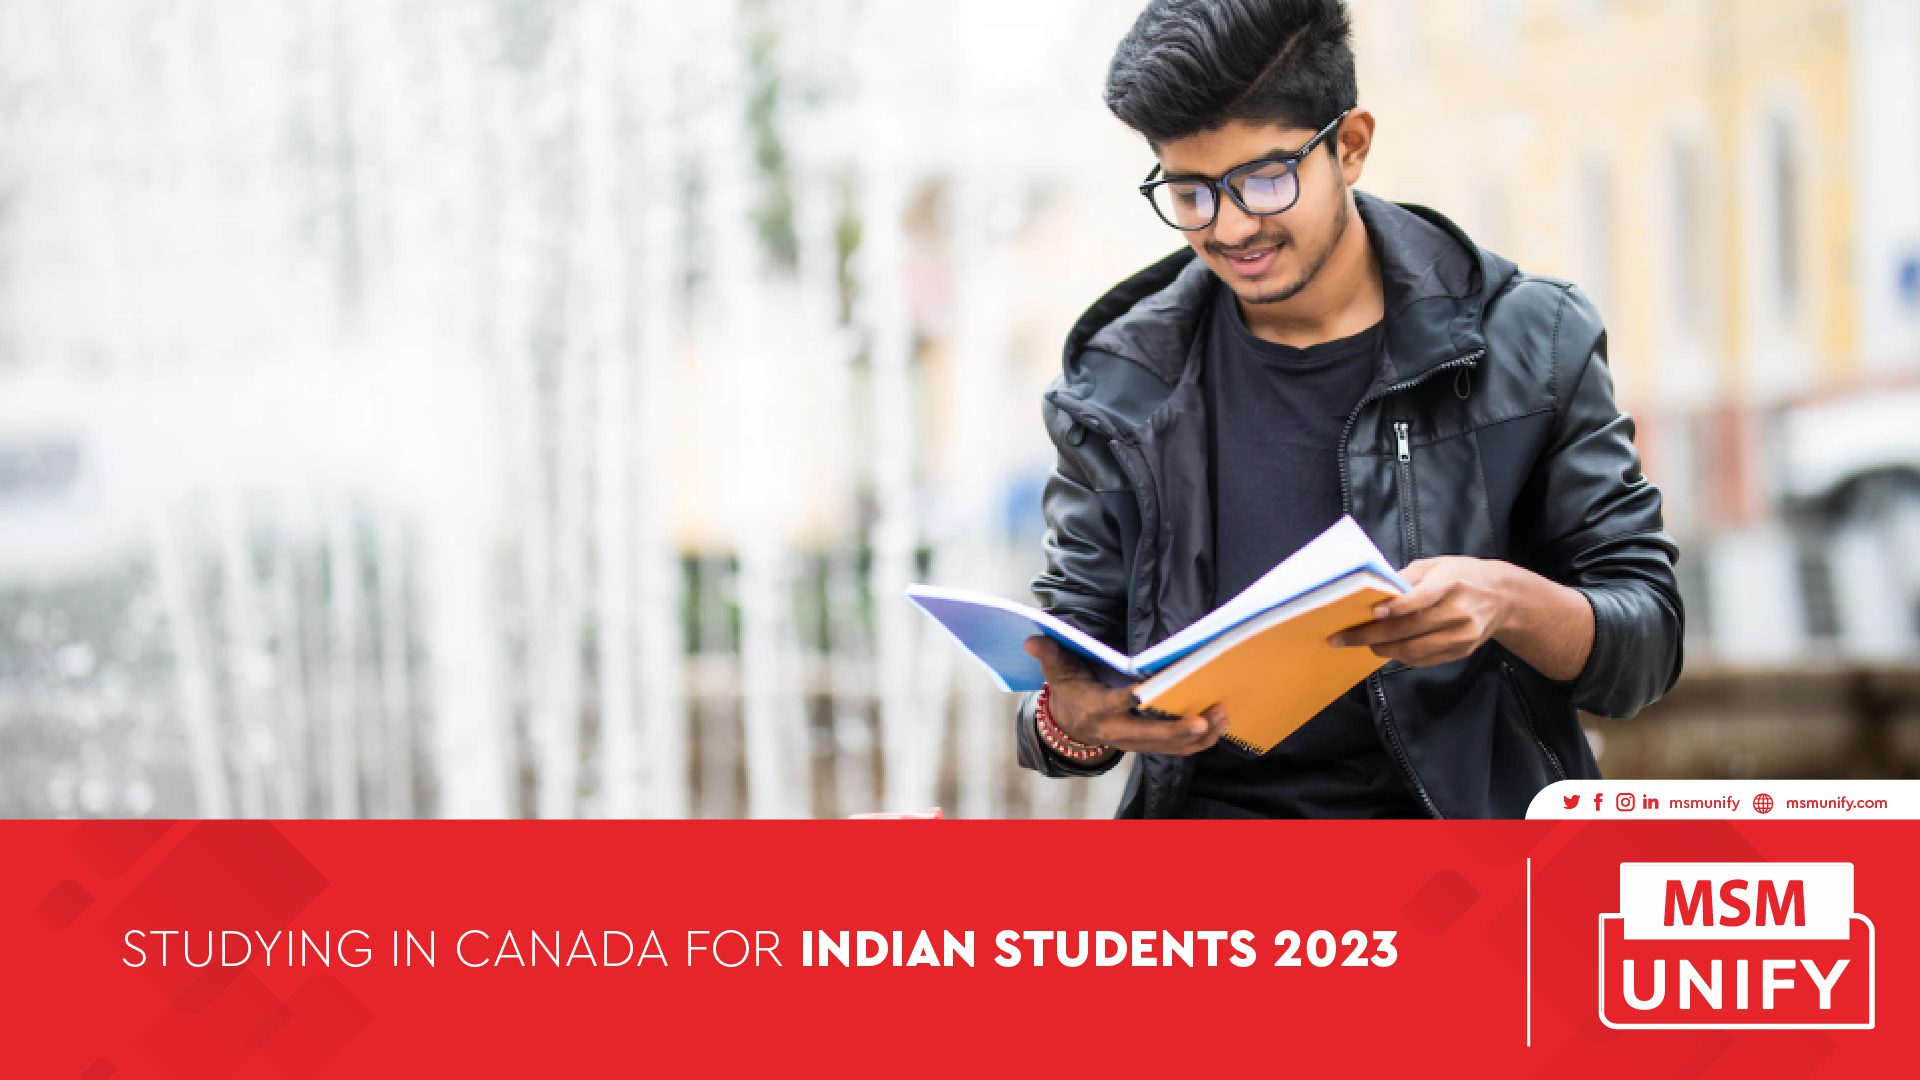 012023 MSM Unify Studying in Canada for Indian Students 2023 01